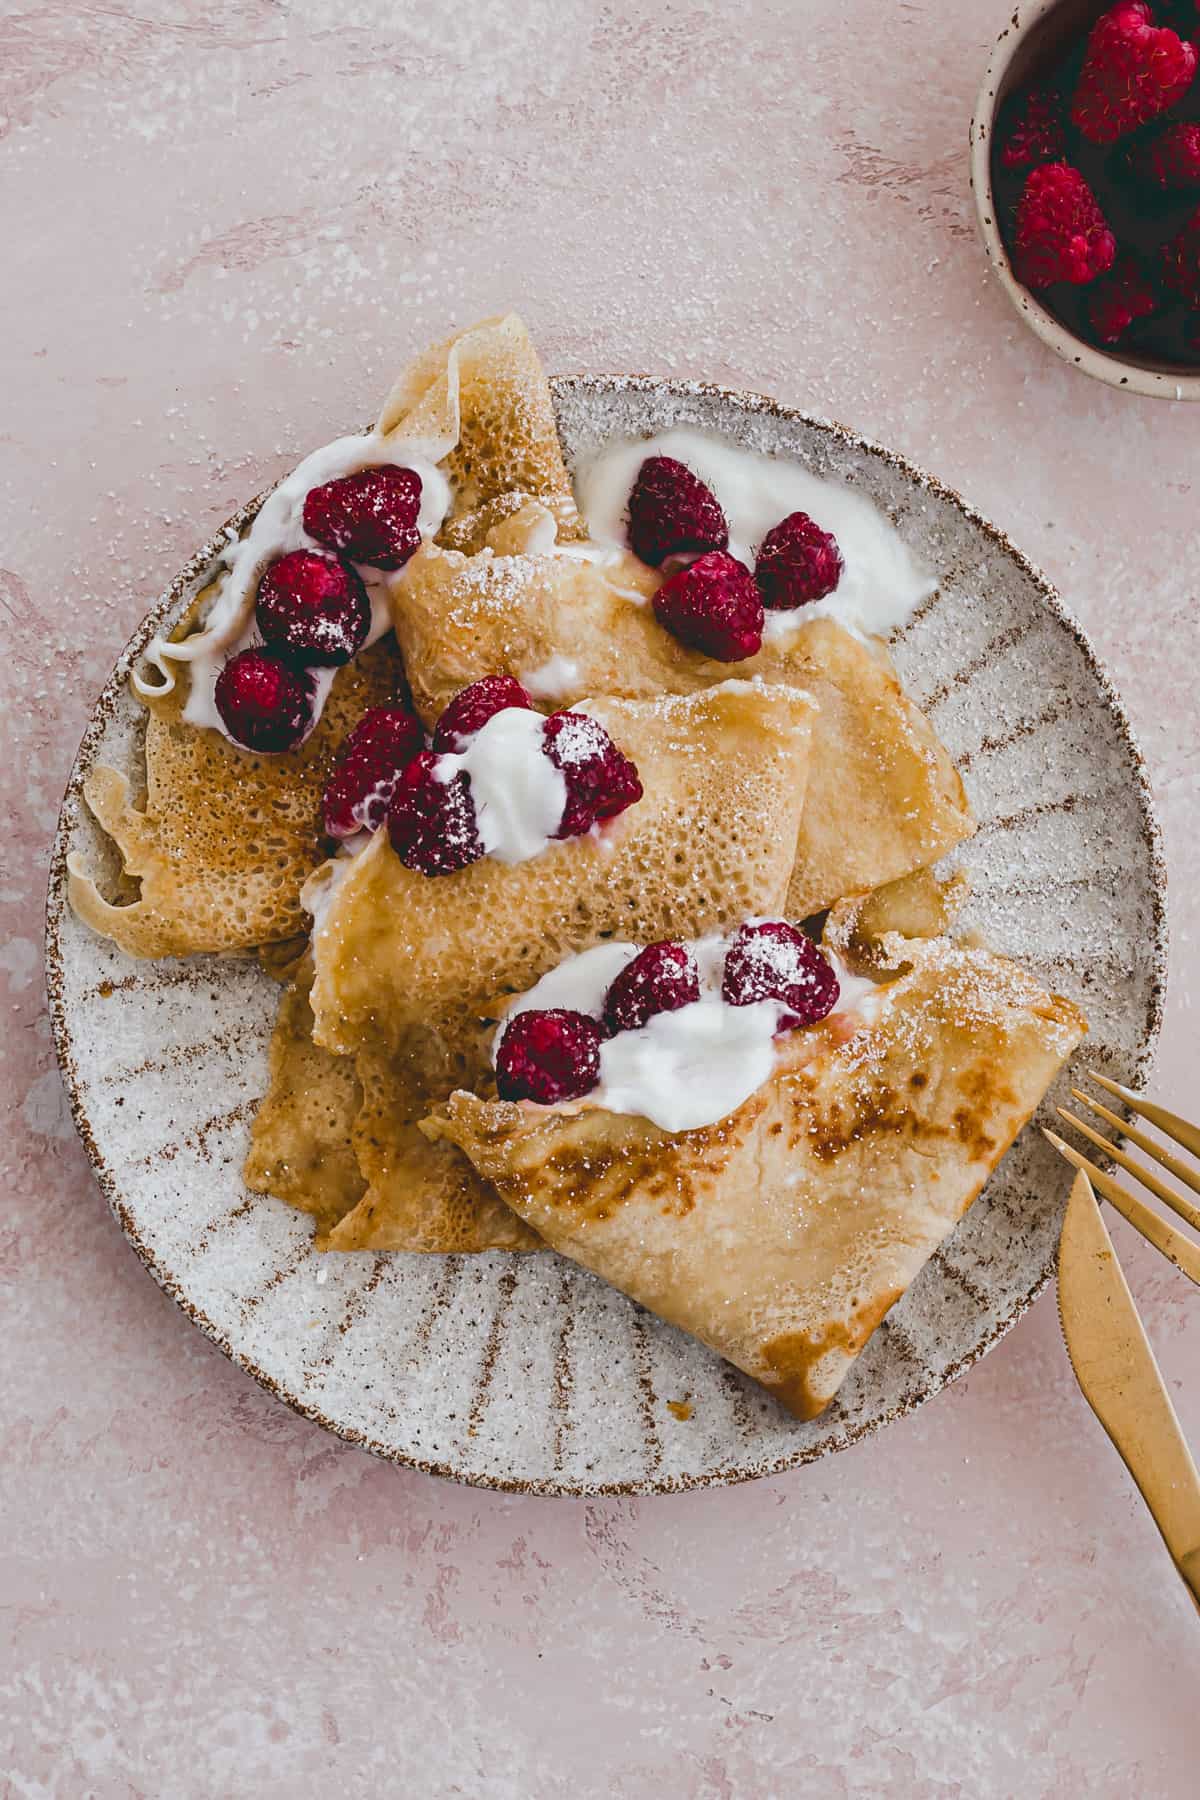 homemade crepes served with yogurt and fresh berries